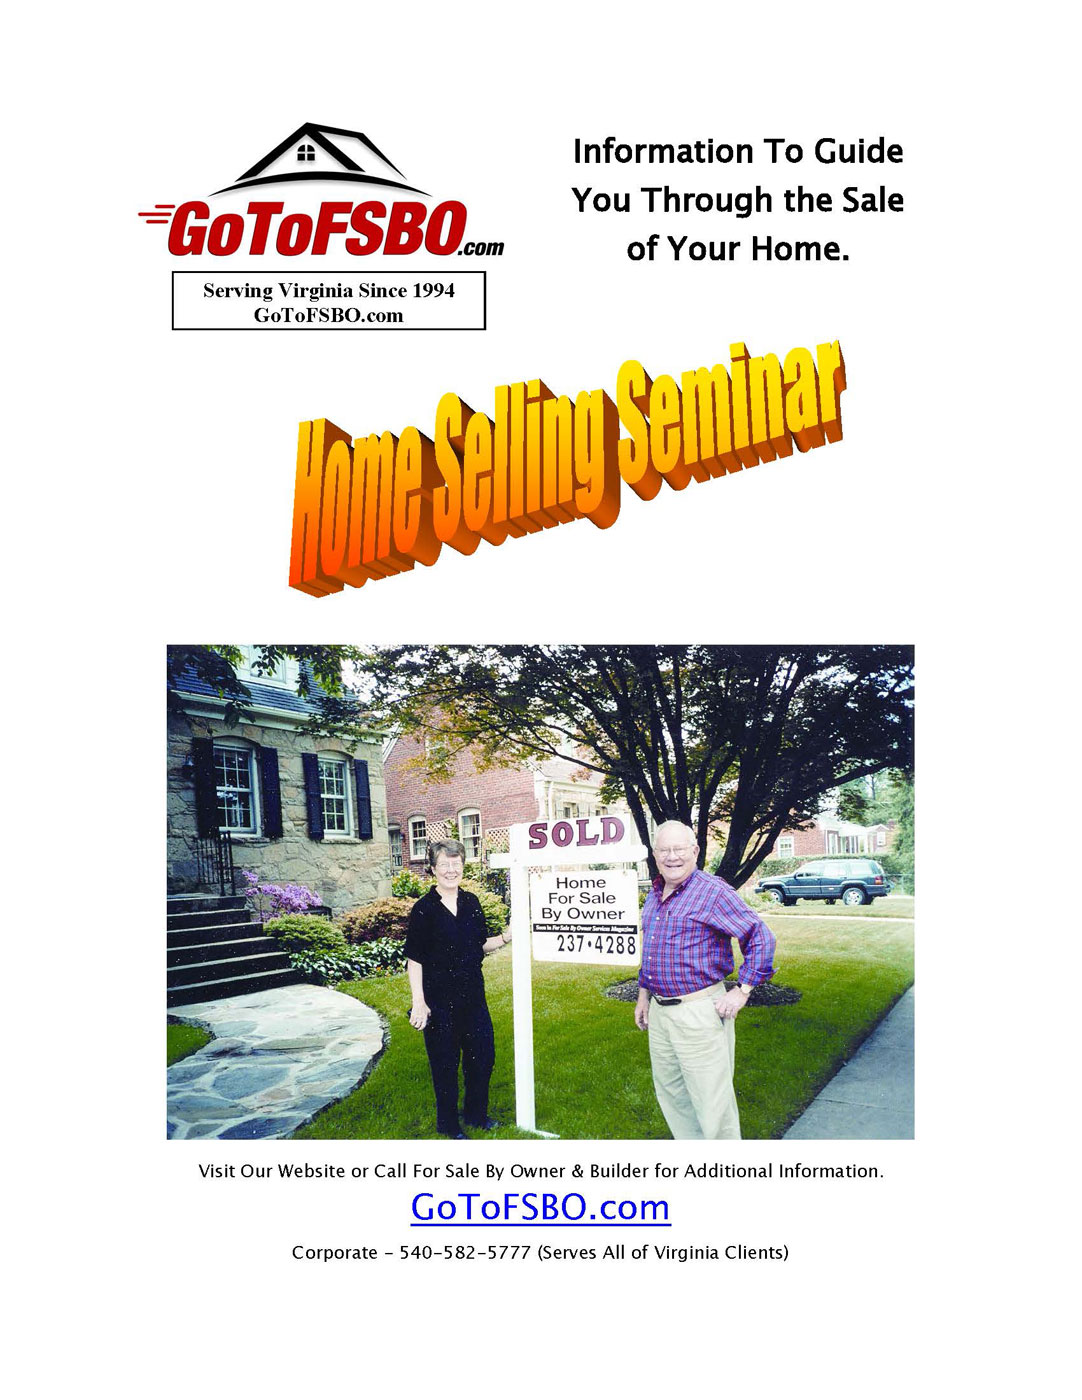 Online Home Selling Kit To Guide You Along the Way of Selling Your Home